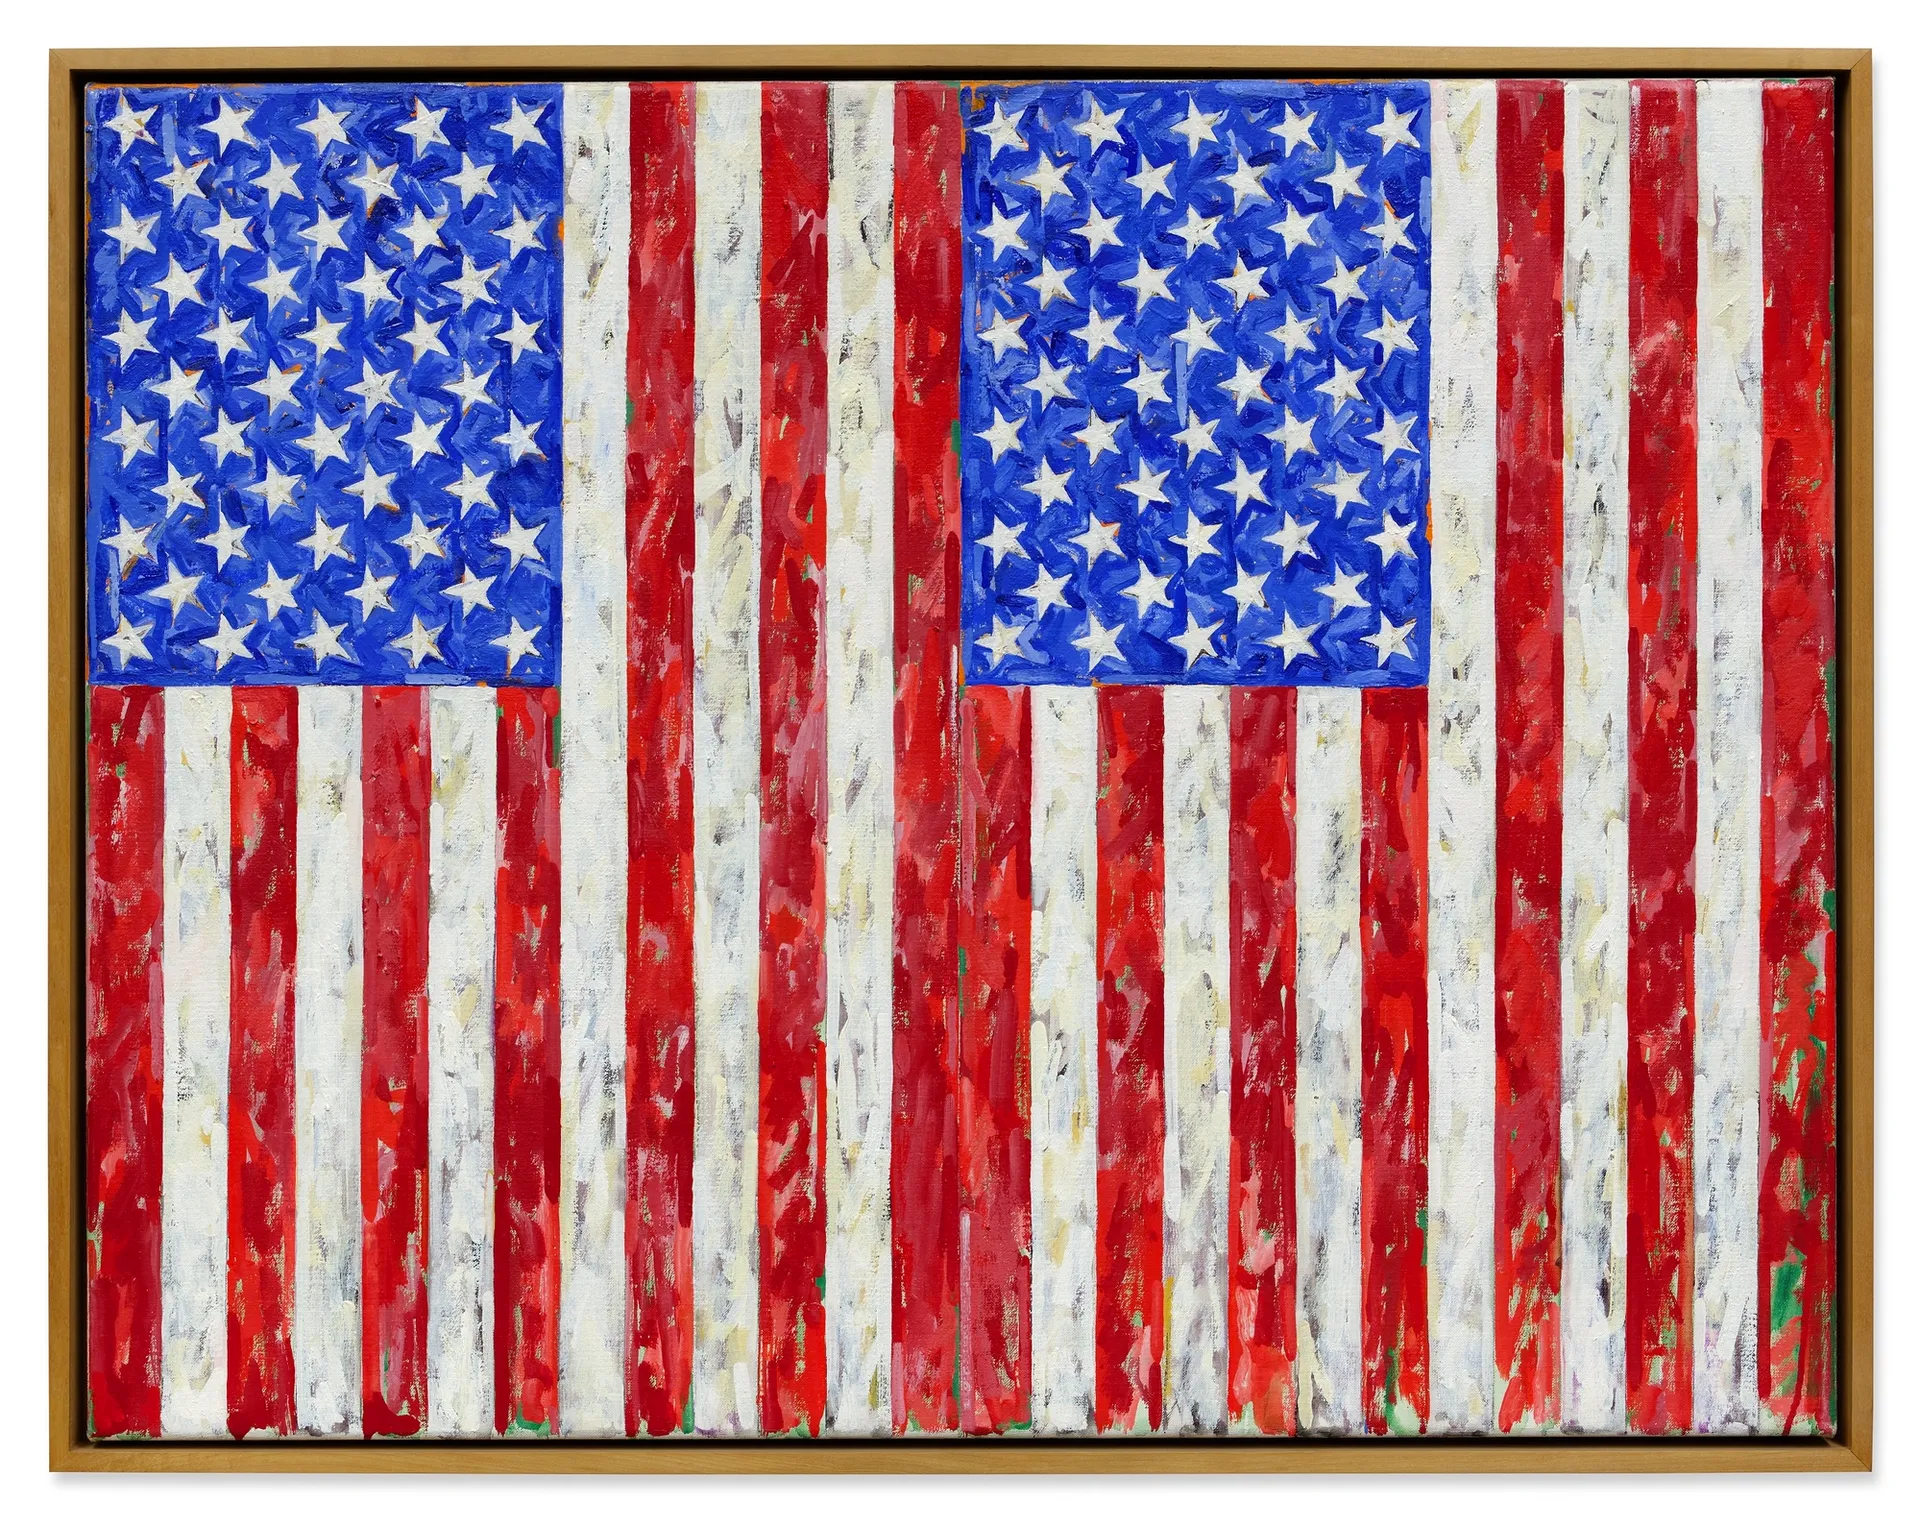 An image of the work Flags by Jasper Johns, showing two flags of the United States, hanging downwards side by side.